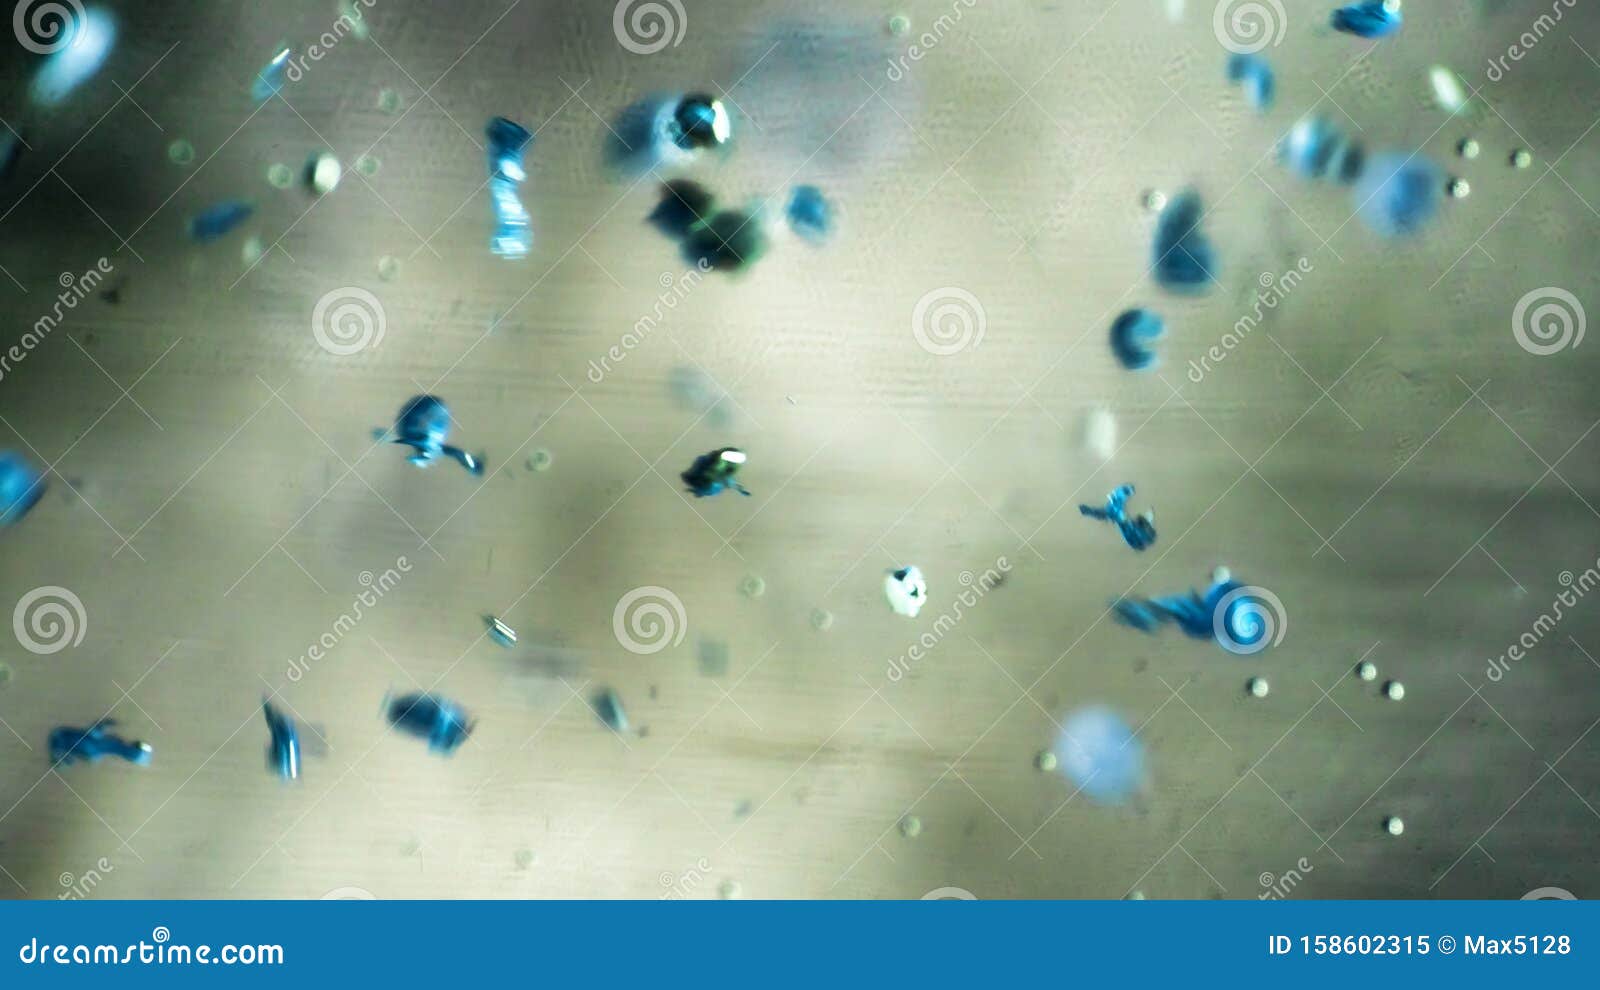 crushing and agglomeration of plastic particles on water surface